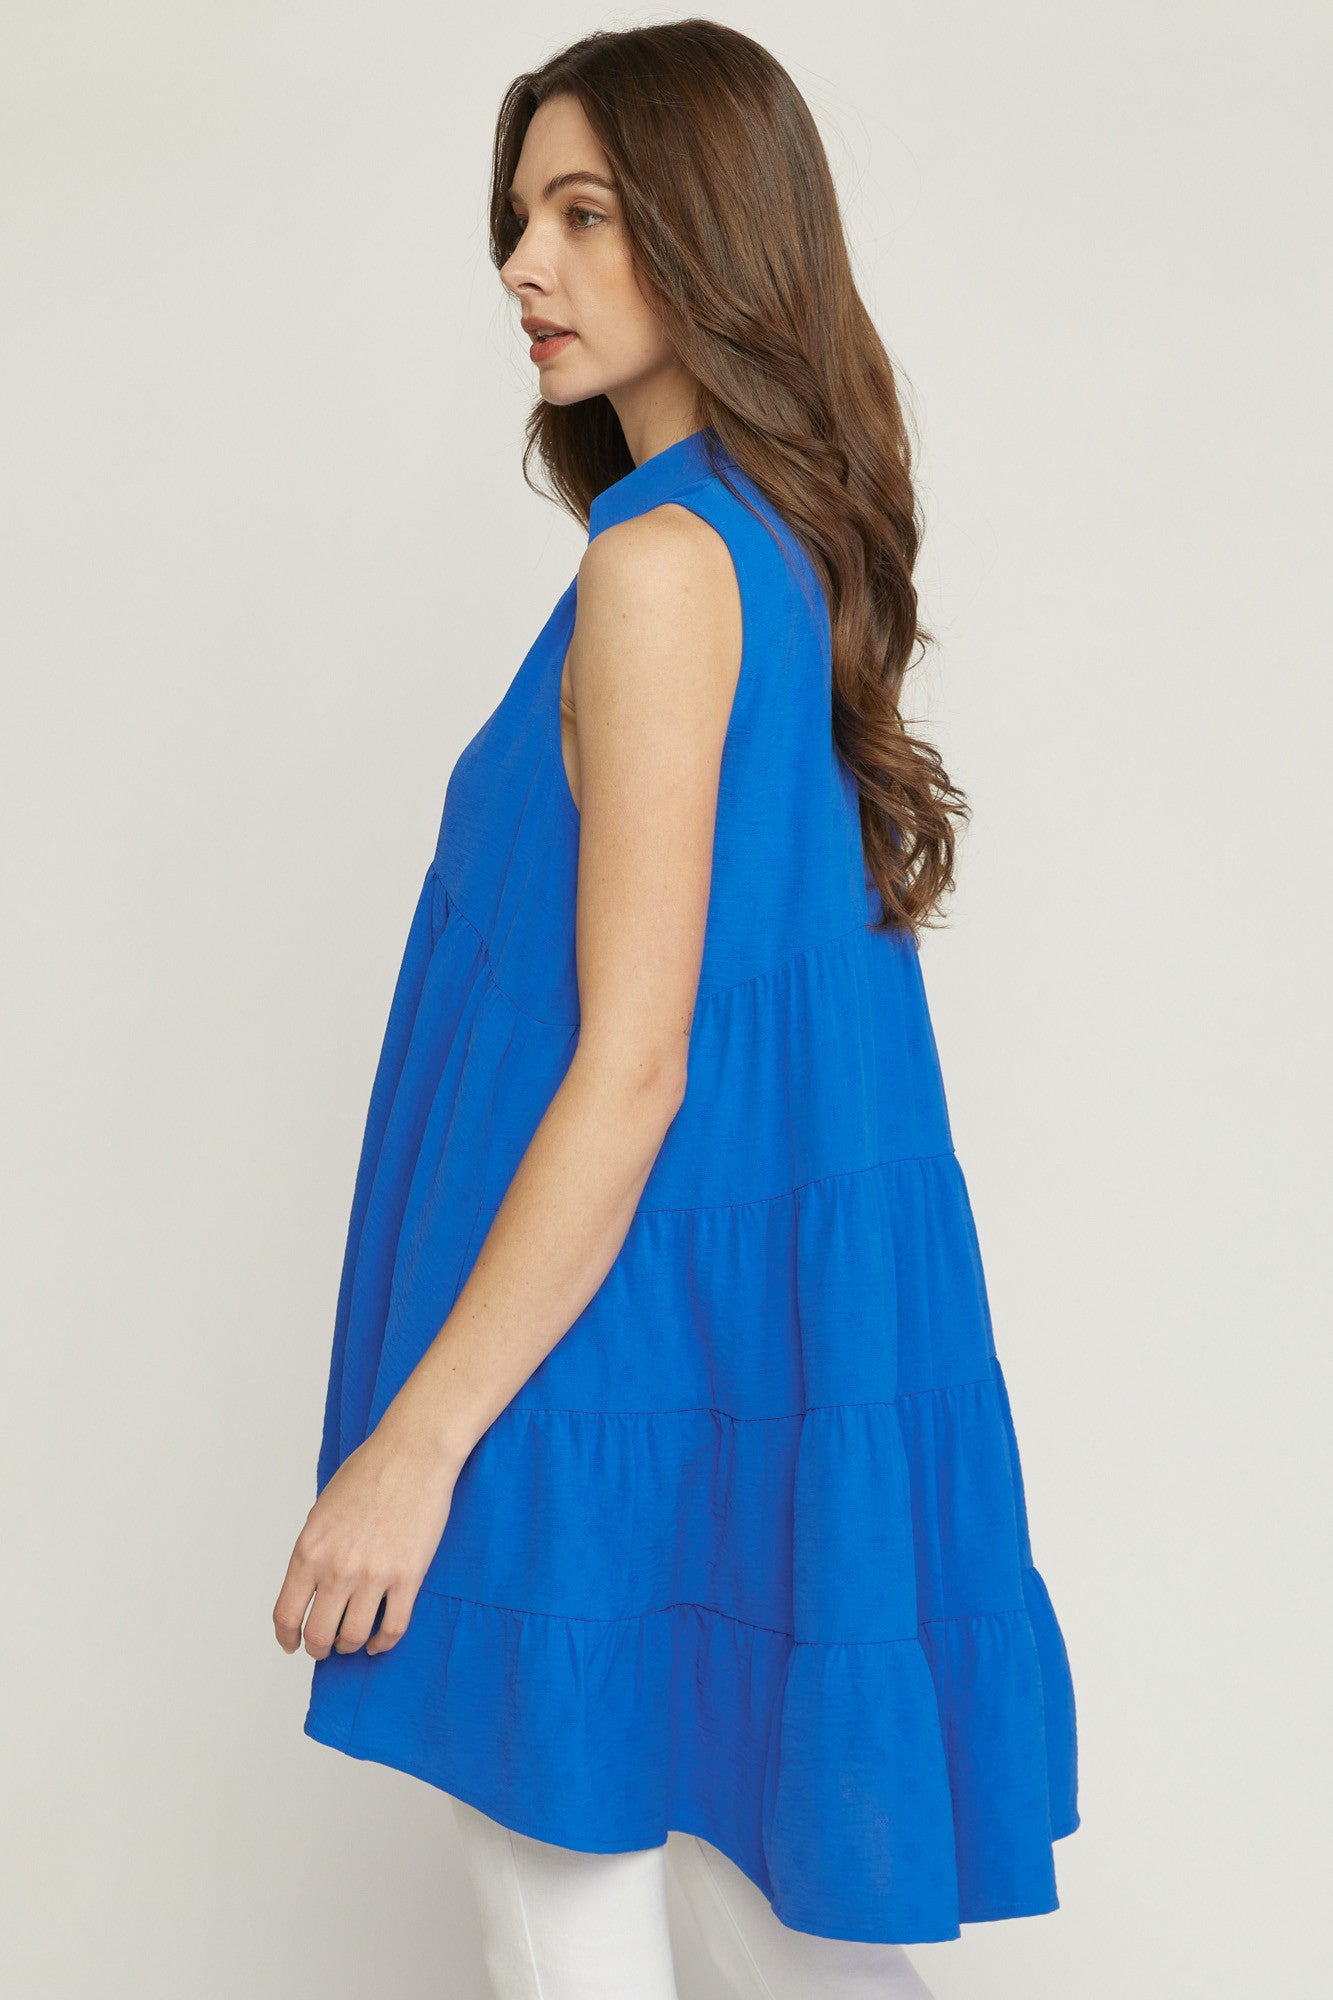 Colbalt Blue Collared Sleeveless Tiered Tunic Top